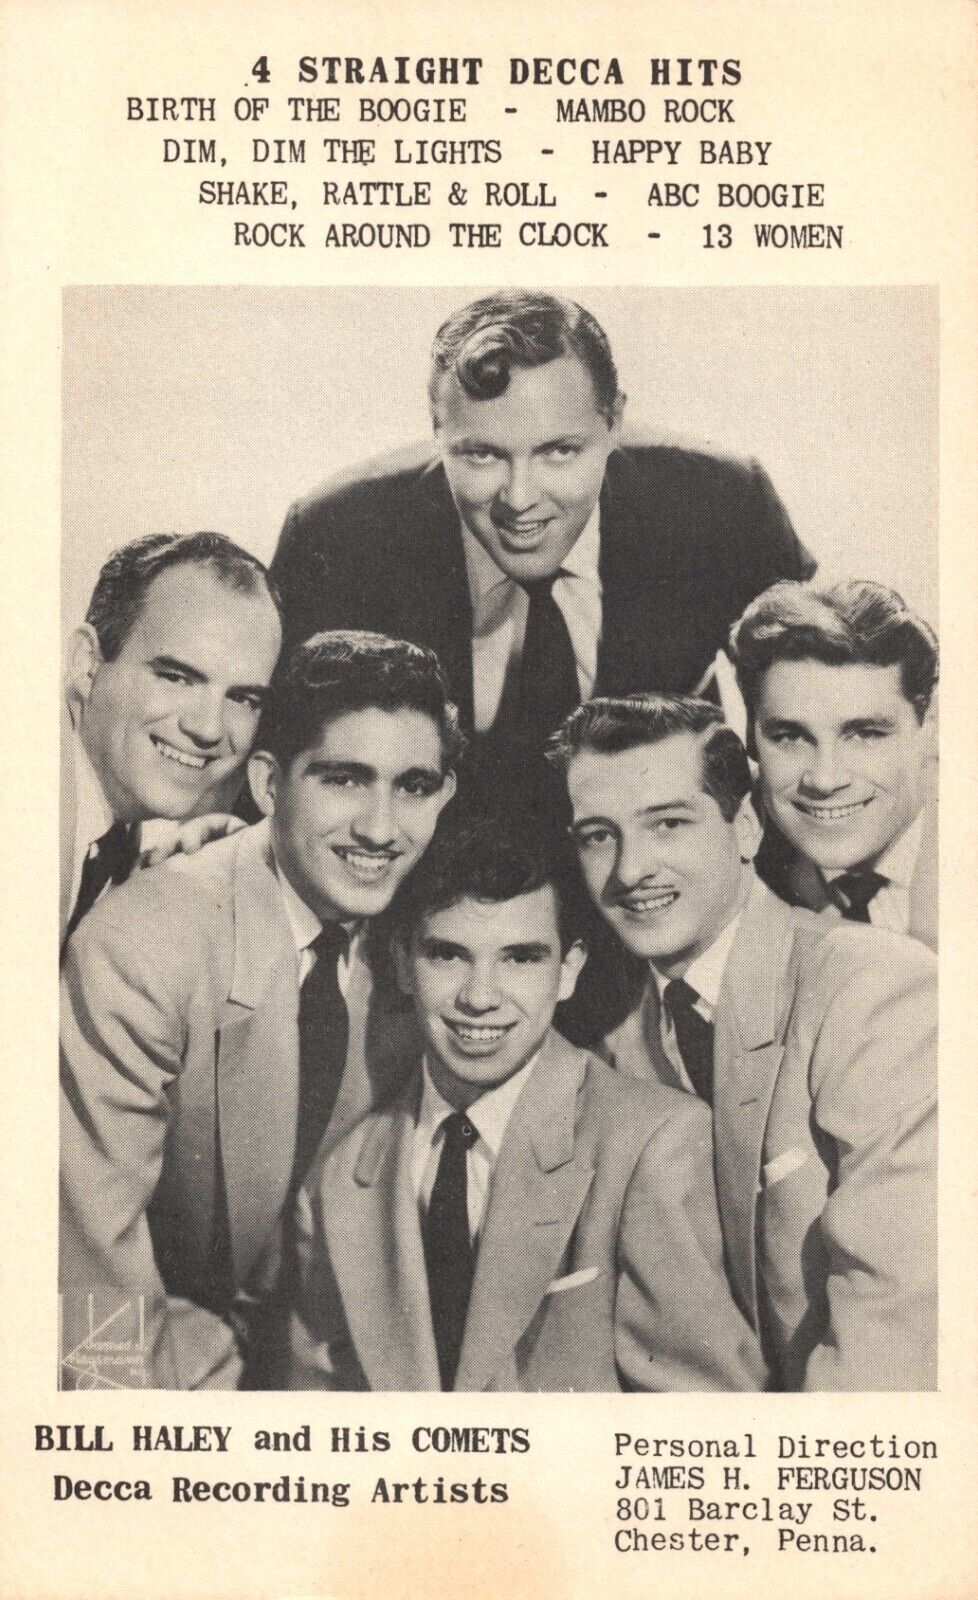 Bill Haley and His Comets Decca Recording Artists Vintage Promotional Postcard